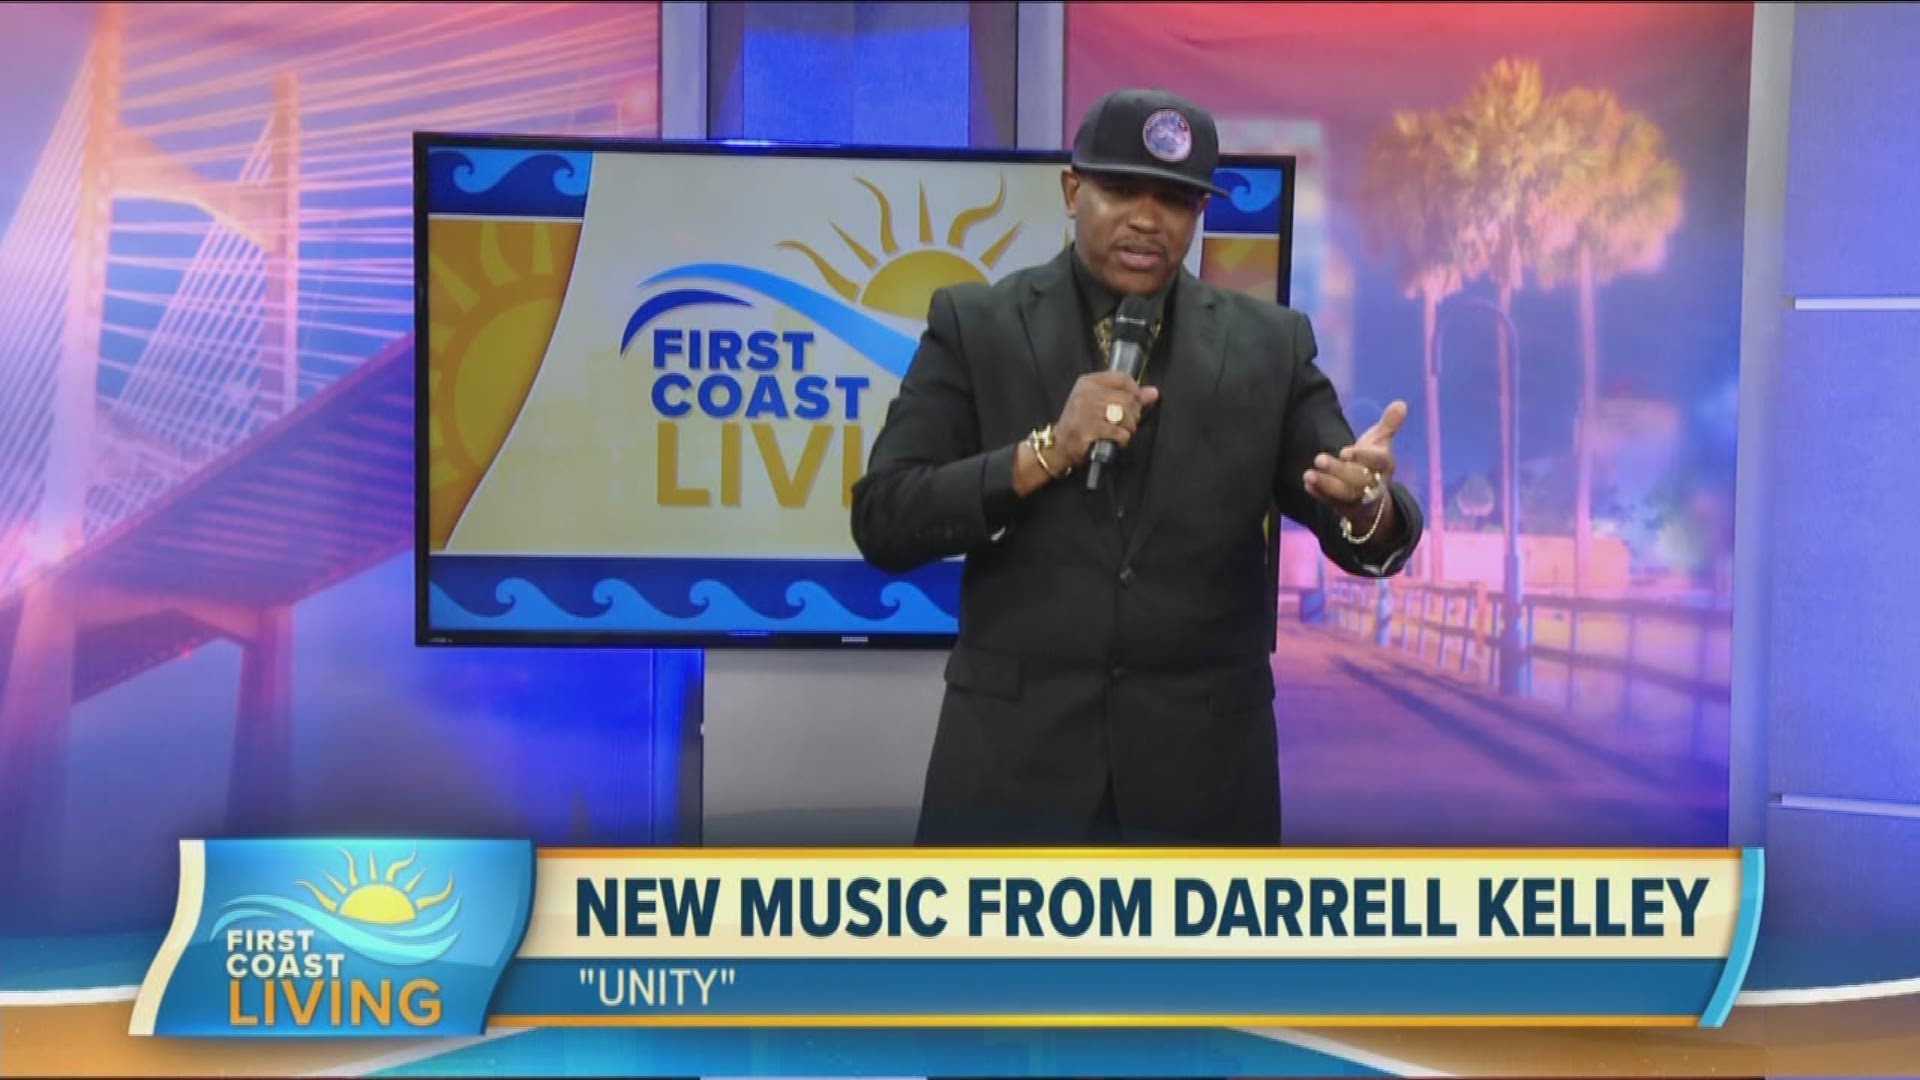 Darrell Kelly performs his original song that aims to spread positivity.